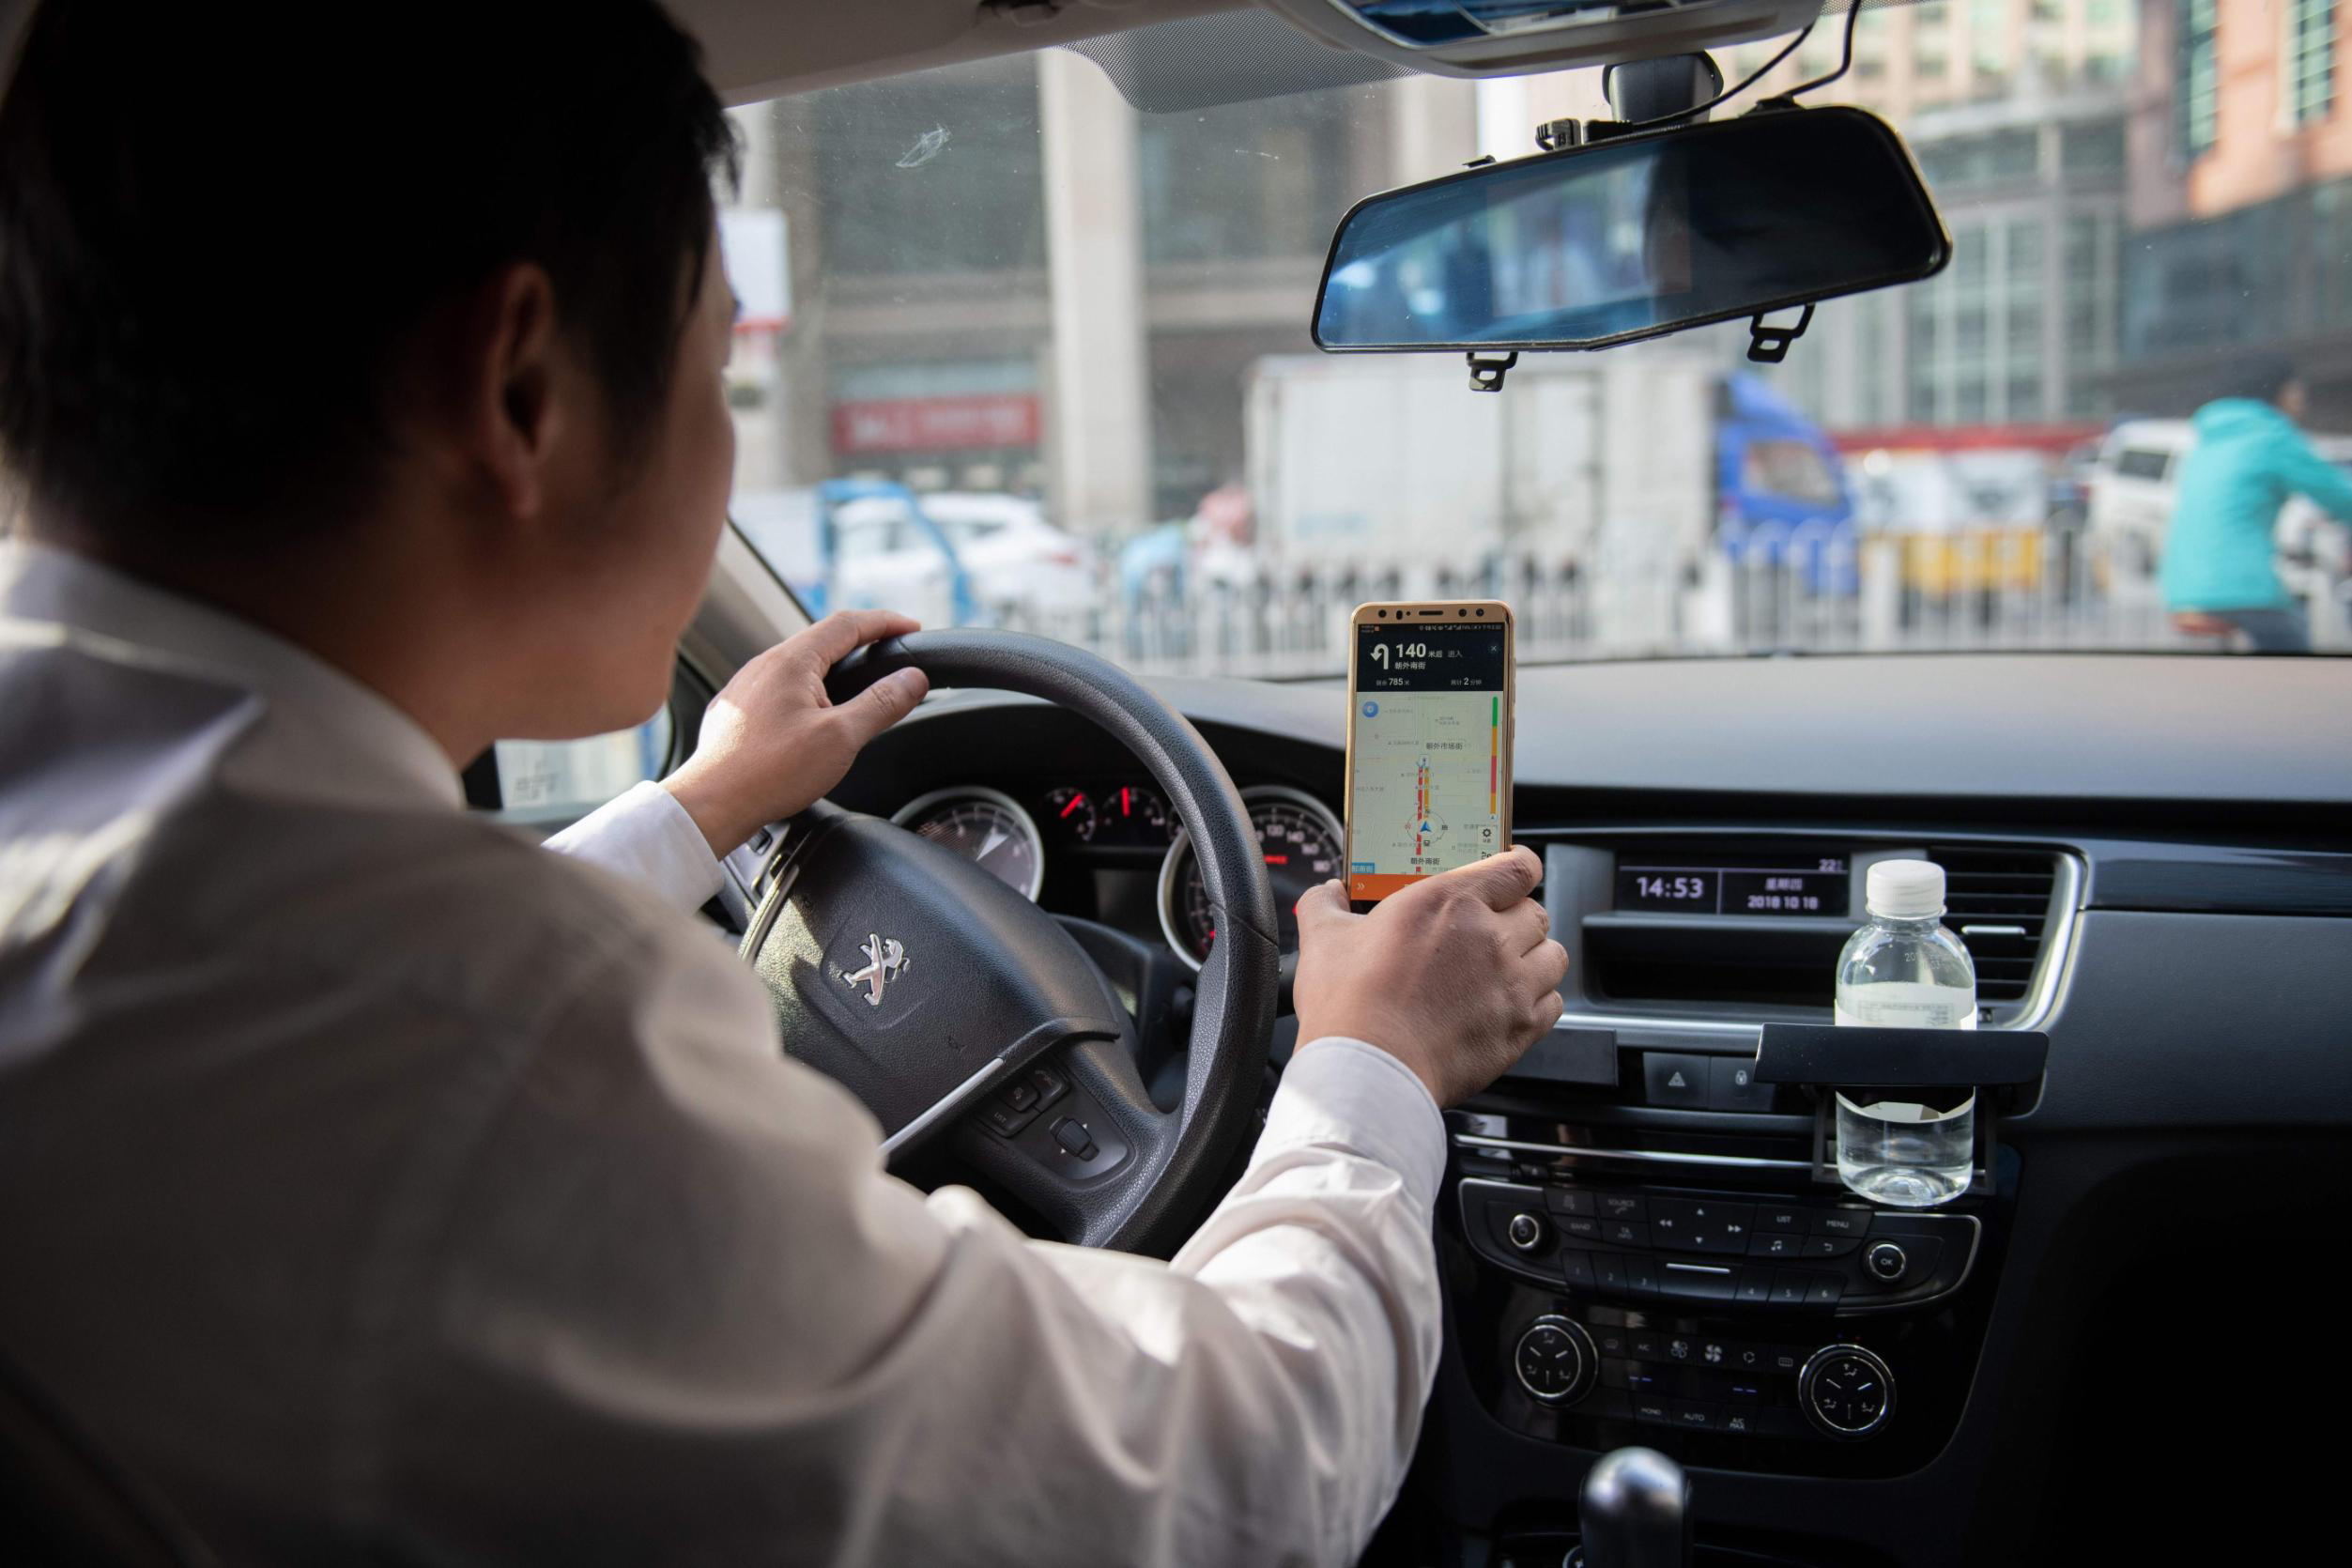 Didi learned to navigate the regulatory gray zone for ride-hailing services in China.